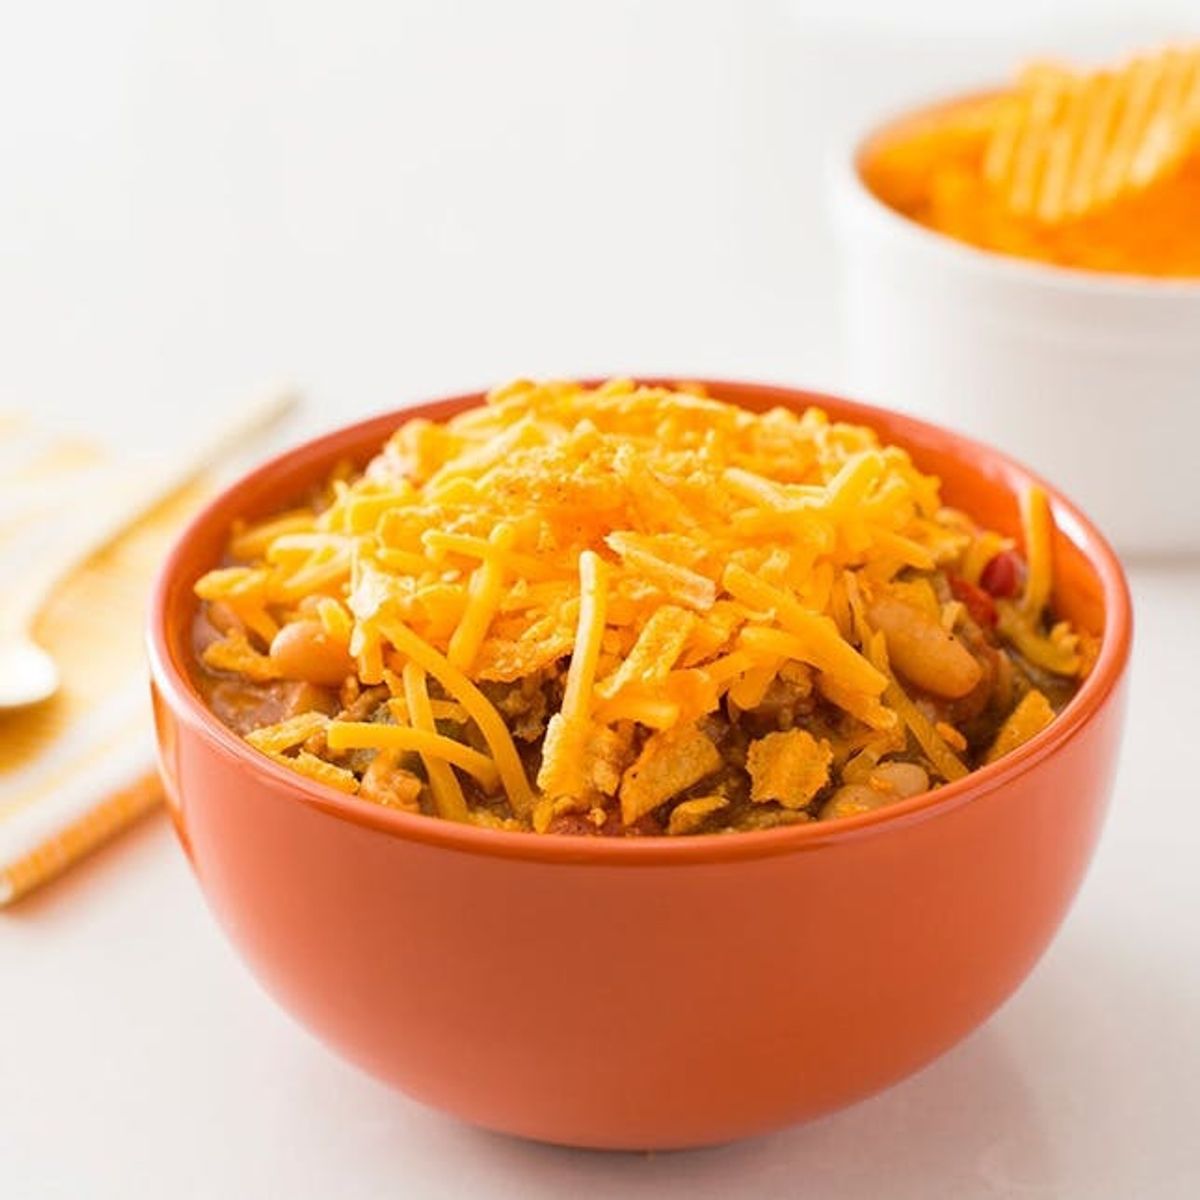 Cozy Up With a Bowl of BBQ Turkey Chili